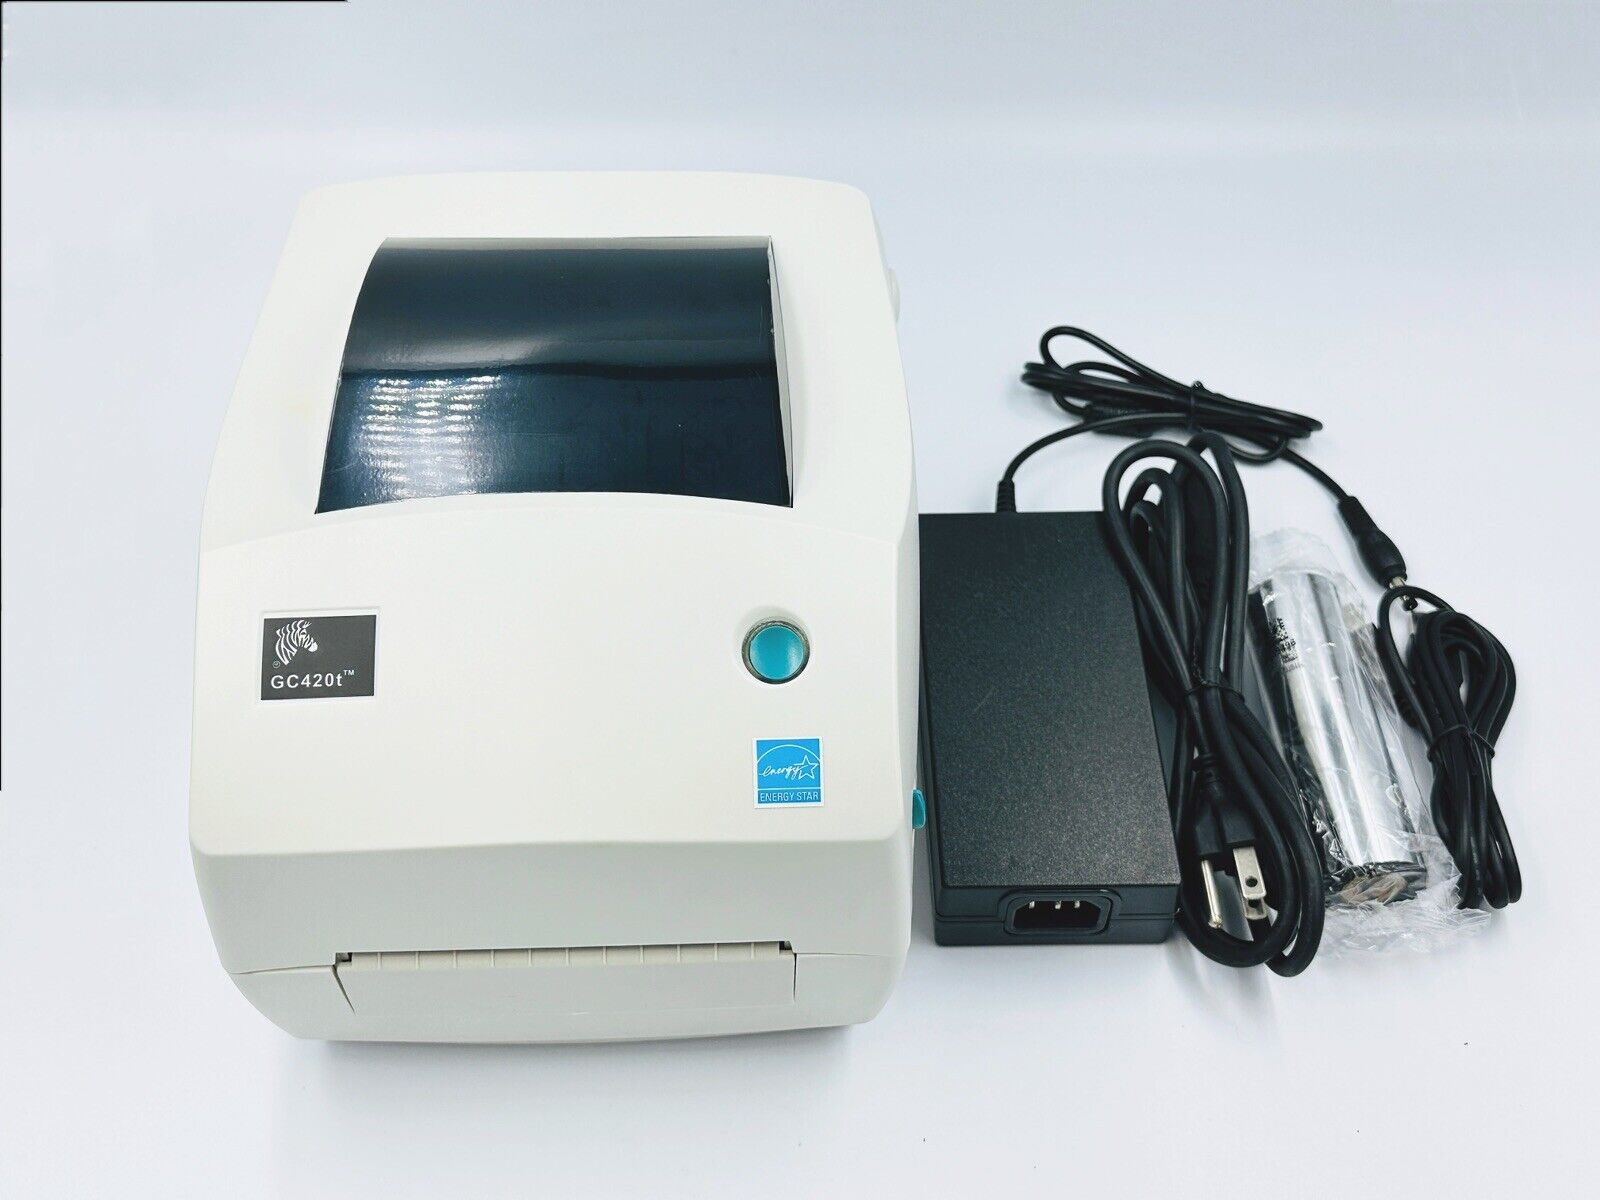 Zebra GC420T Label Thermal Printer USB, Serial& parallel Shipping Out Today. Available Now for $135.00